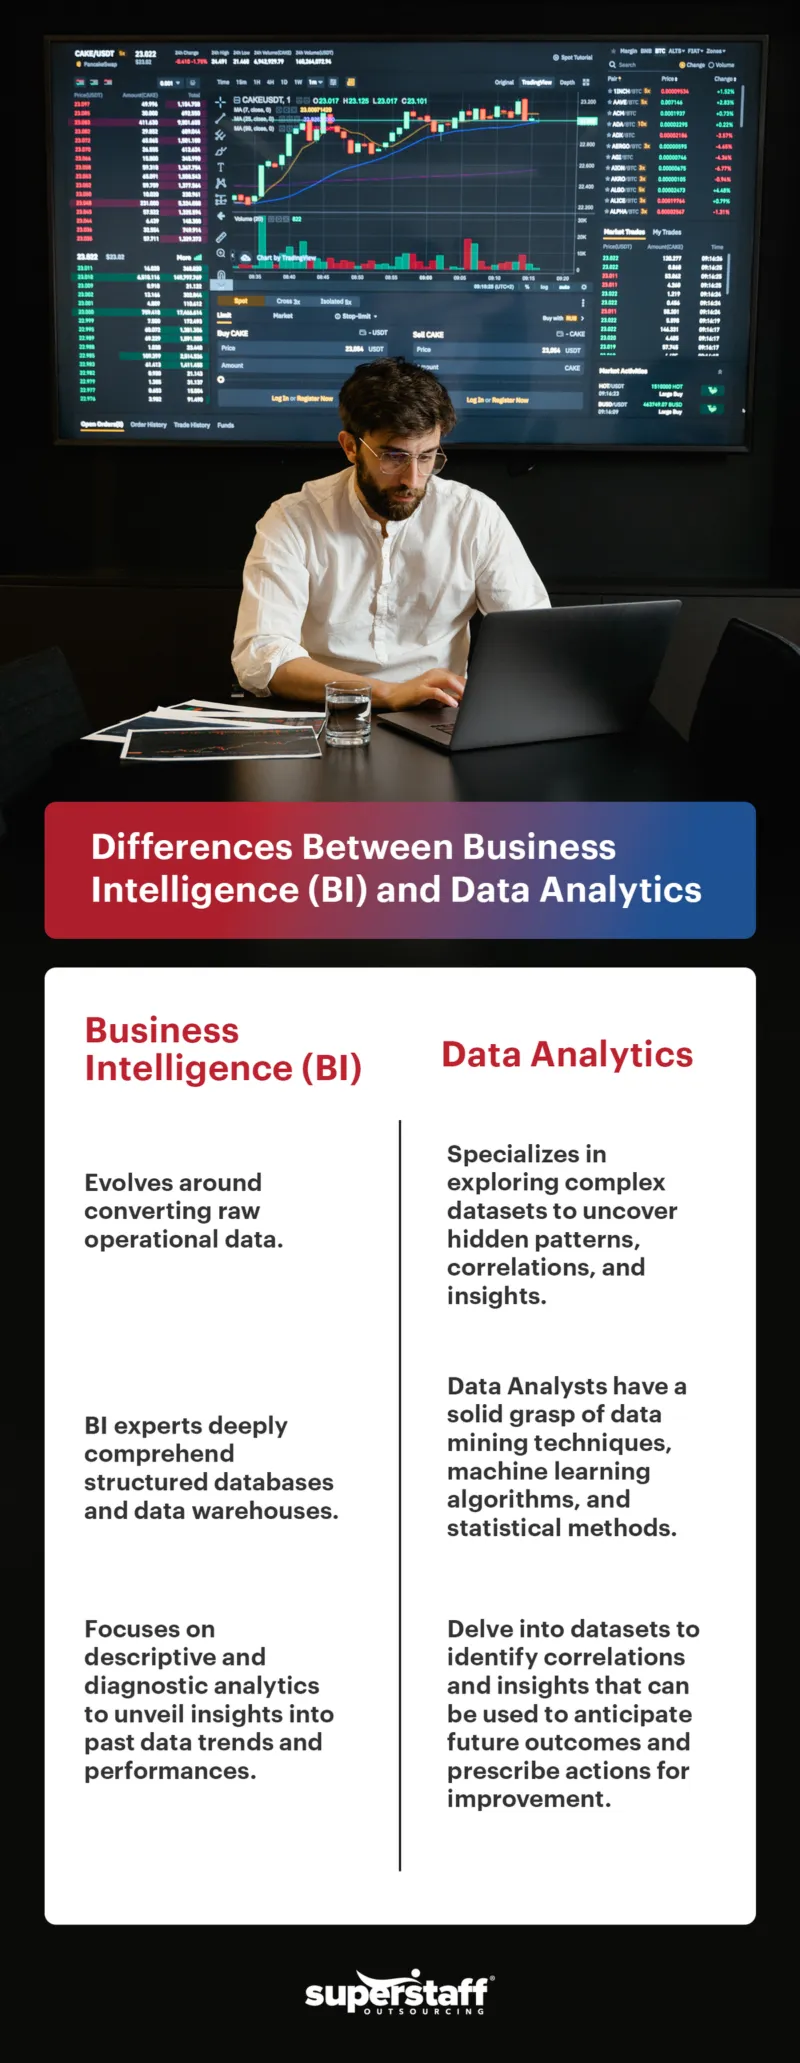 An infographic outlines Differences Between Business Intelligence (BI) and Data Analytics.